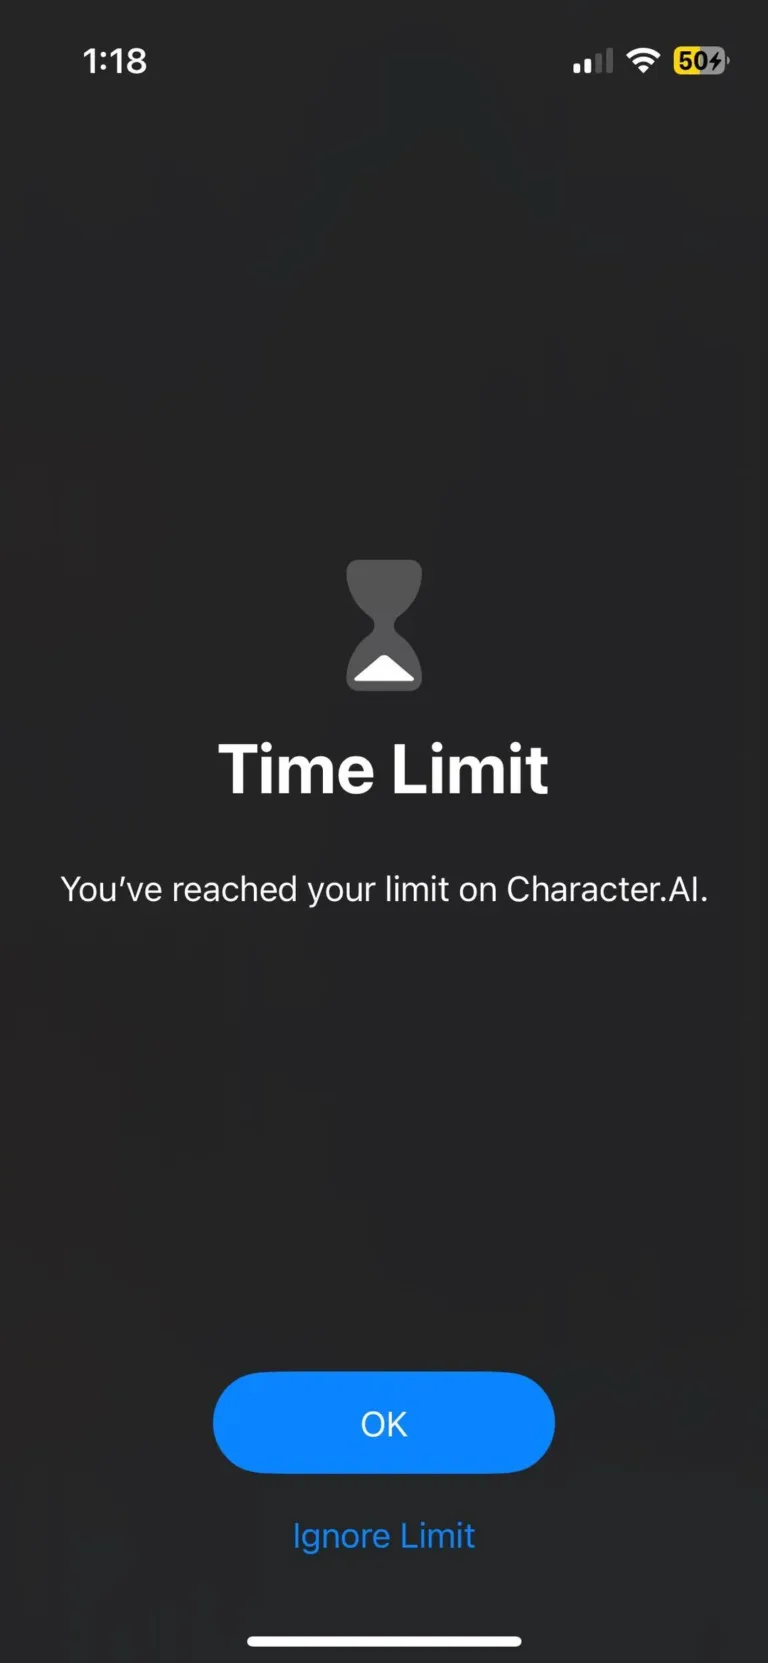 Time Limit – You’ve Reached Your Limit on Character.AI